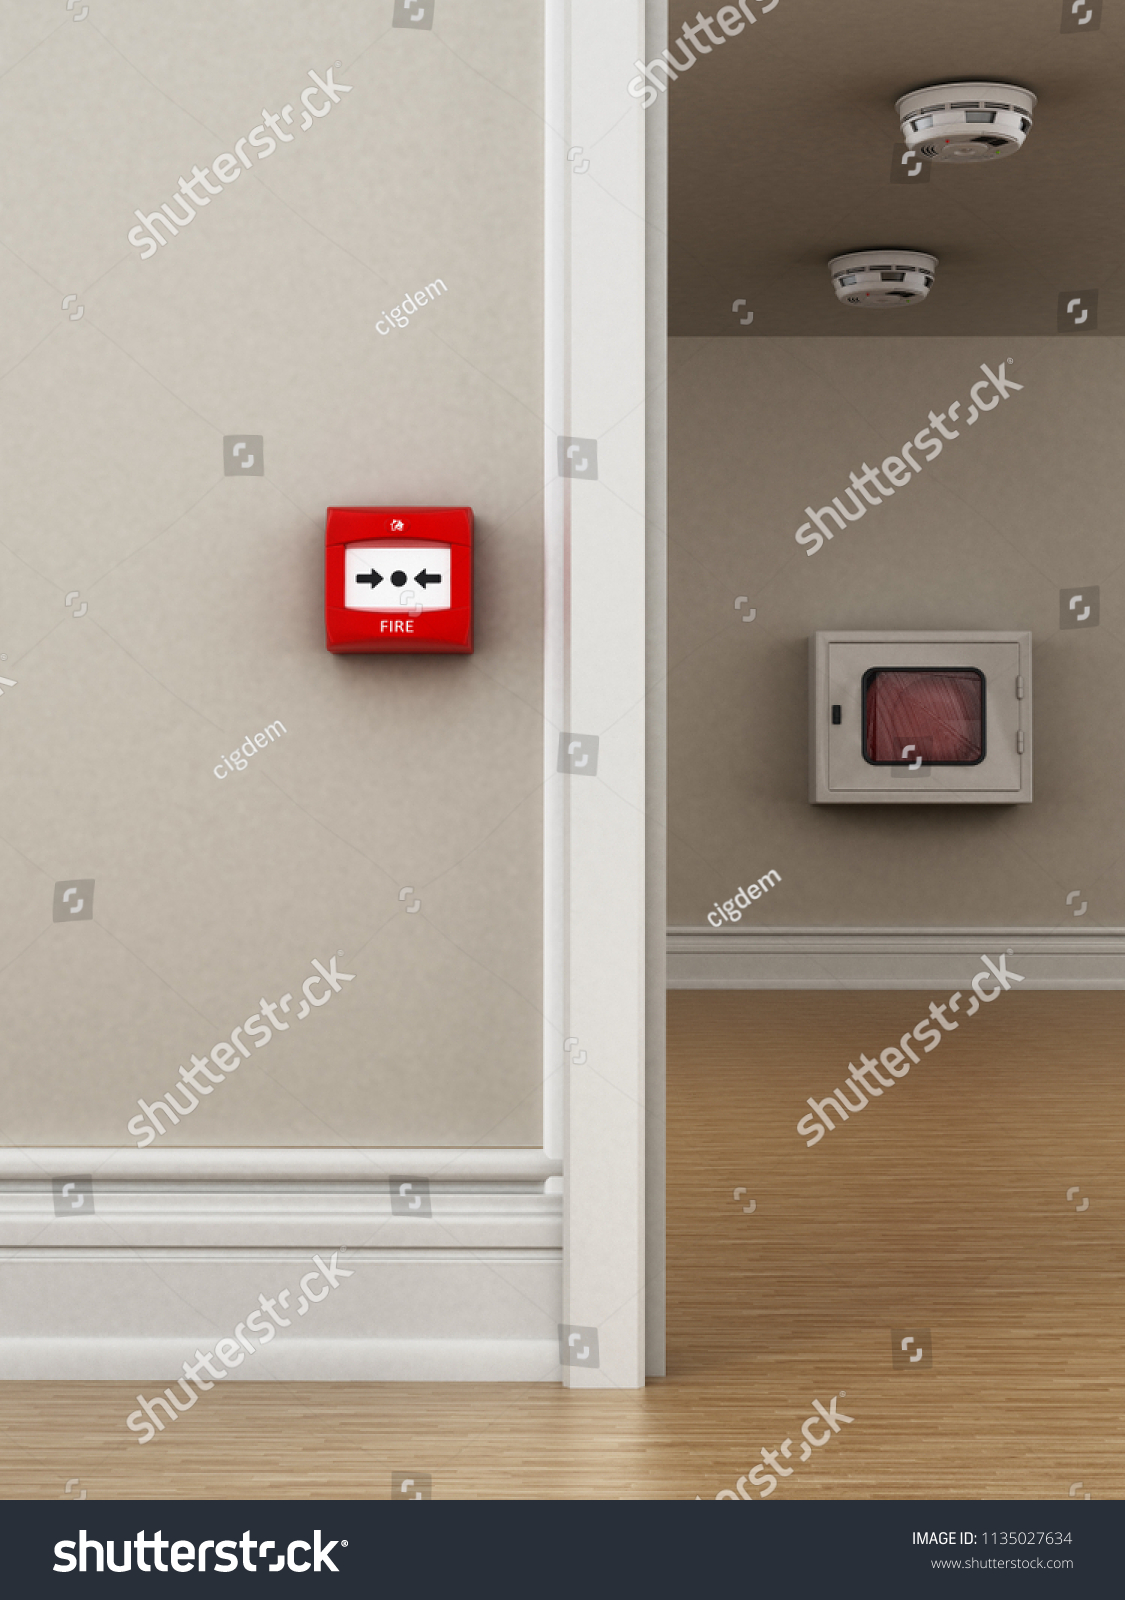 Fire button, smoke detectors and hose on the wall. 3D illustration. #1135027634